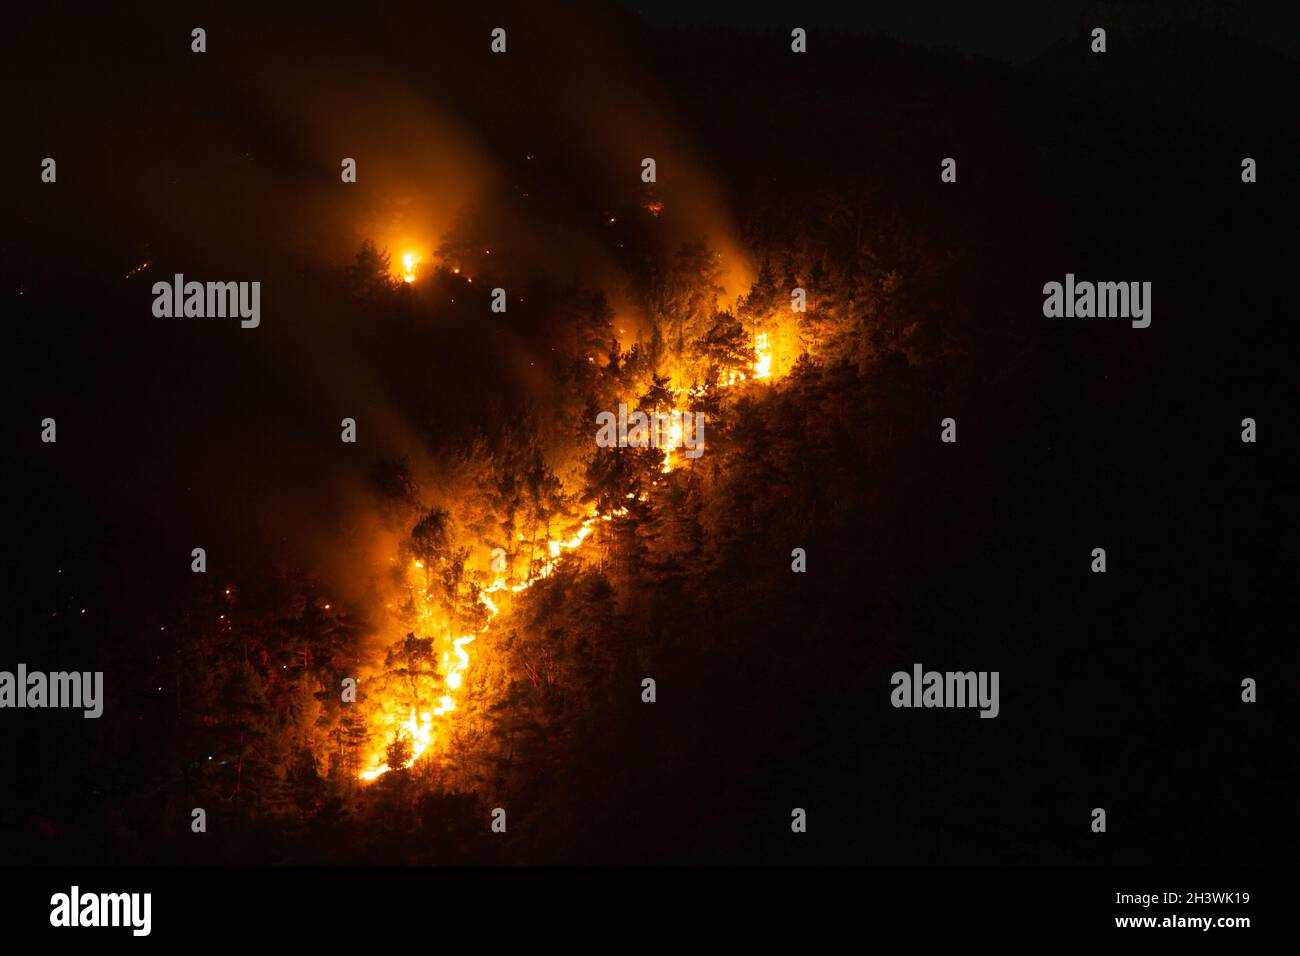 The fire is advancing in a line. Night view of a forest fire in a steep rocky terrain. Flames, sparks and smoke rise to the sky. Silhouettes of tree. Stock Photo